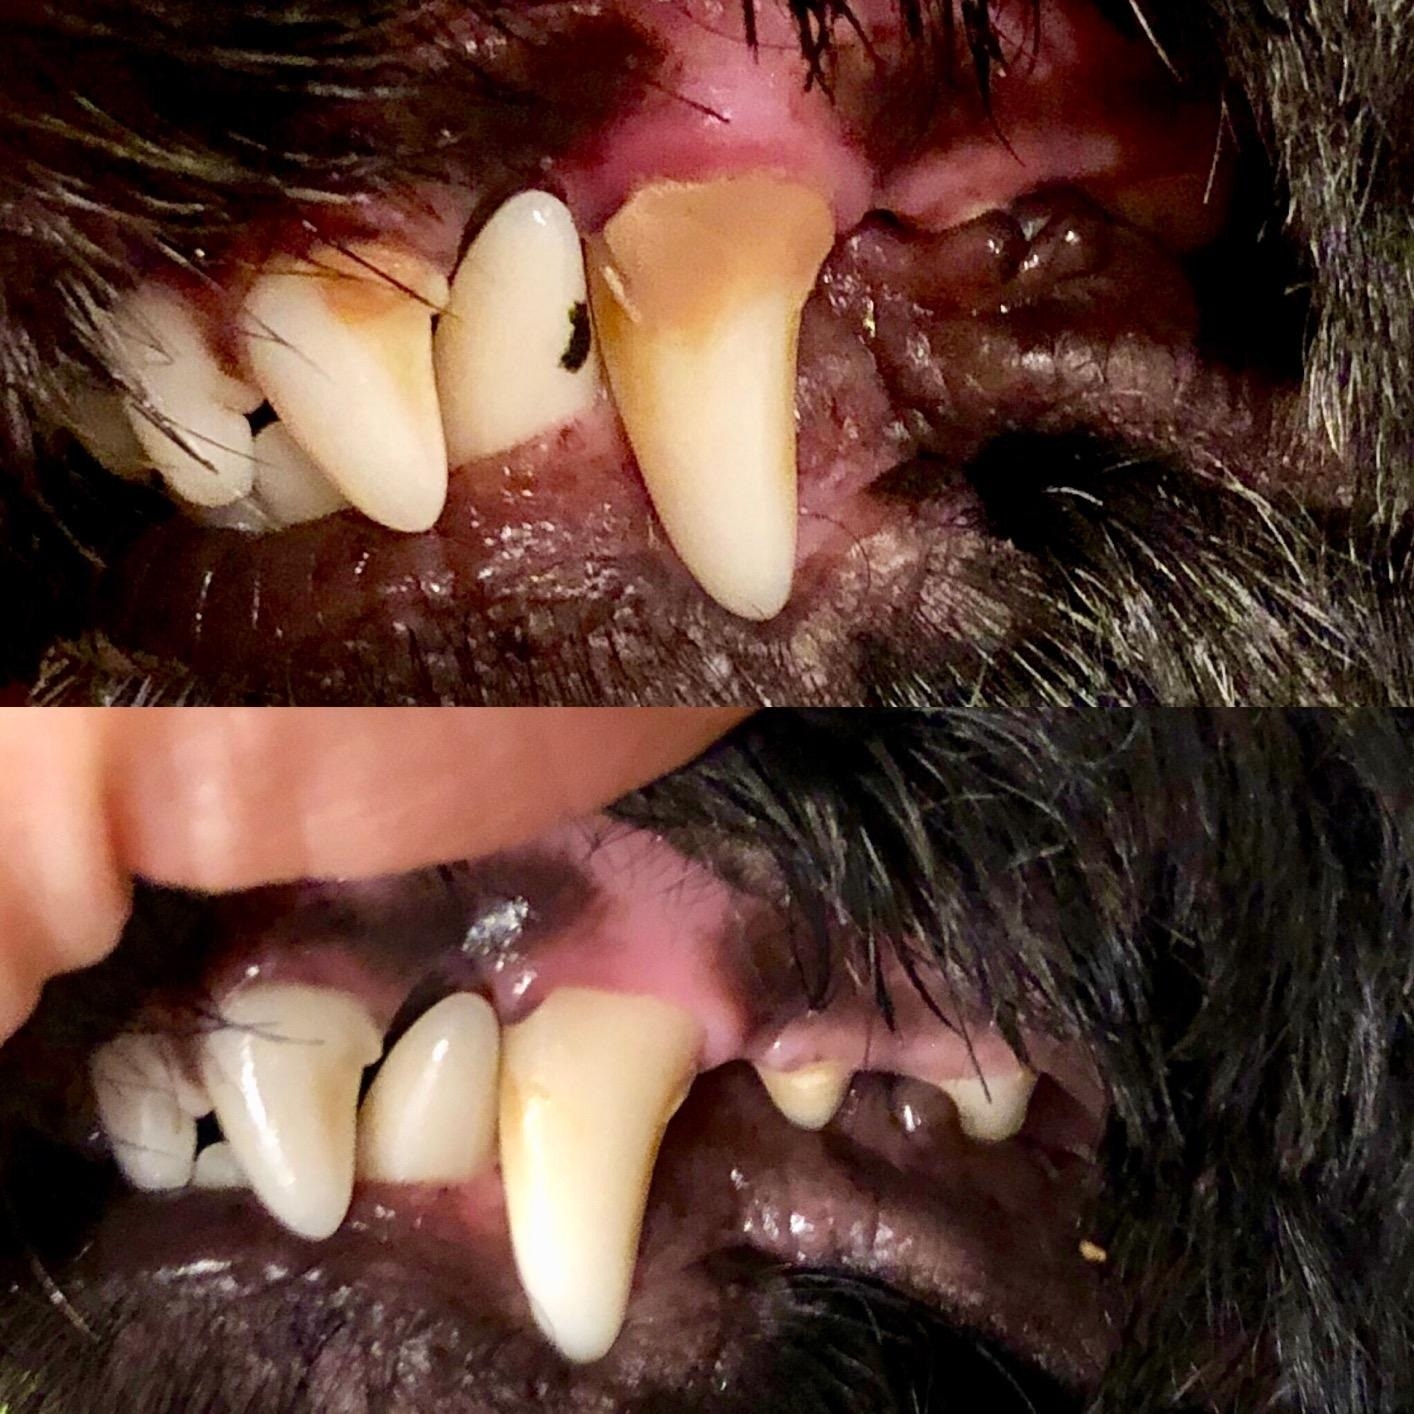 on top: close-up of dog&#x27;s stained teeth. on bottom: same dog&#x27;s teeth with less stains after using the toothpaste